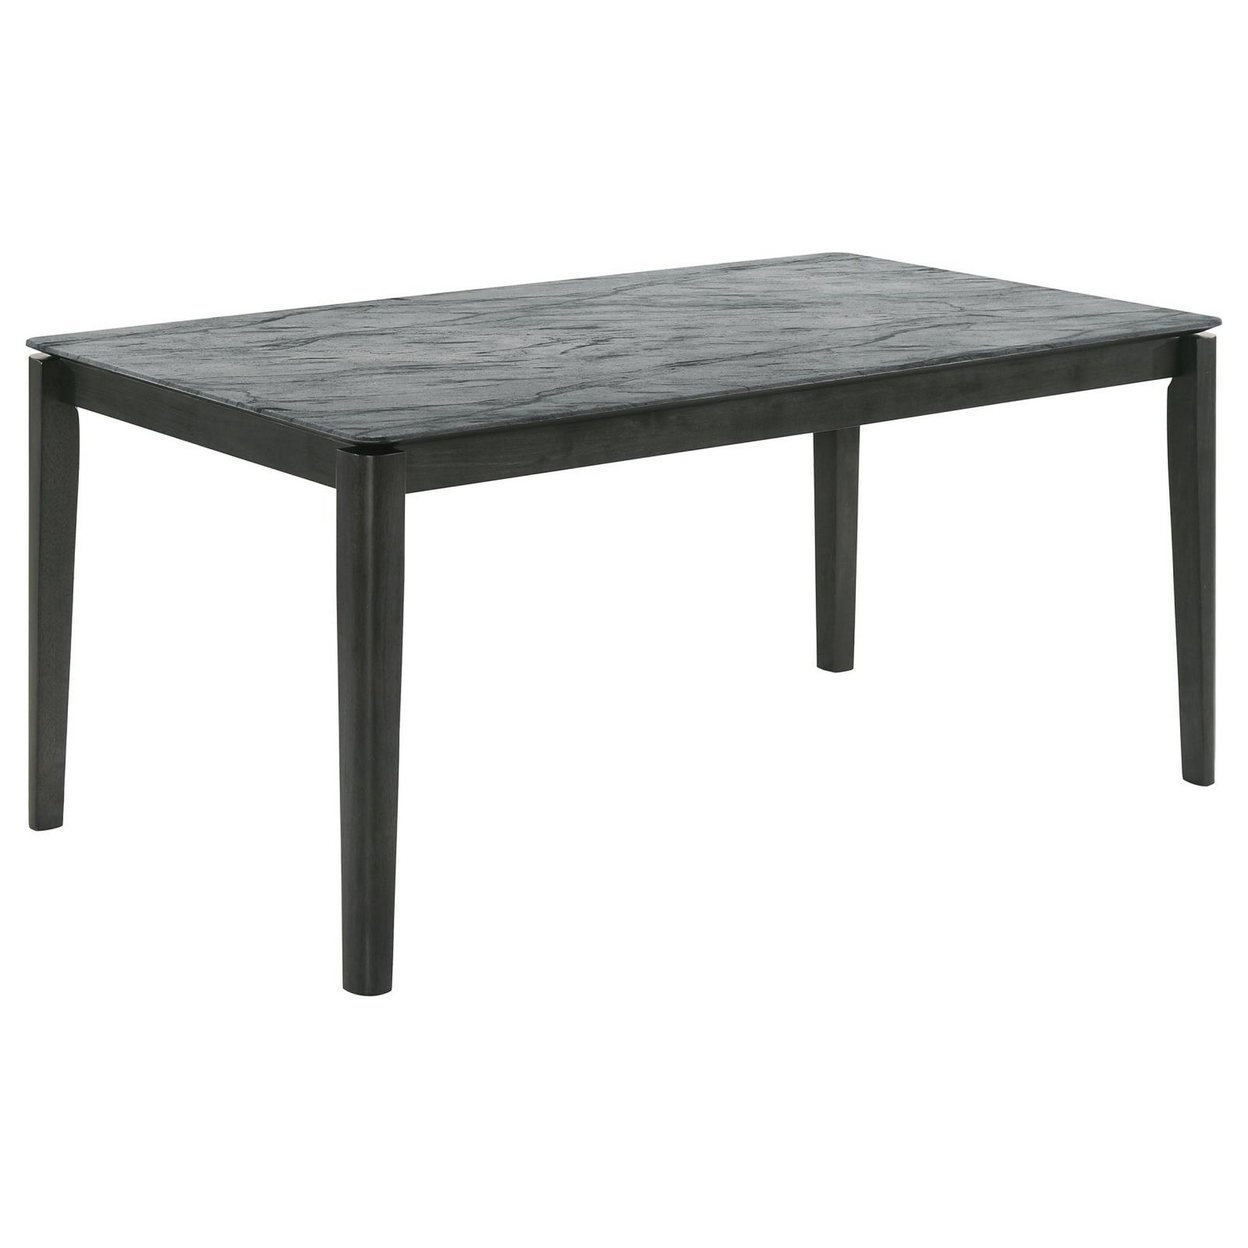 Abi 63 Inch Dining Table, Beveled Top, Faux Marble Finish, Charcoal -Saltoro Sherpi